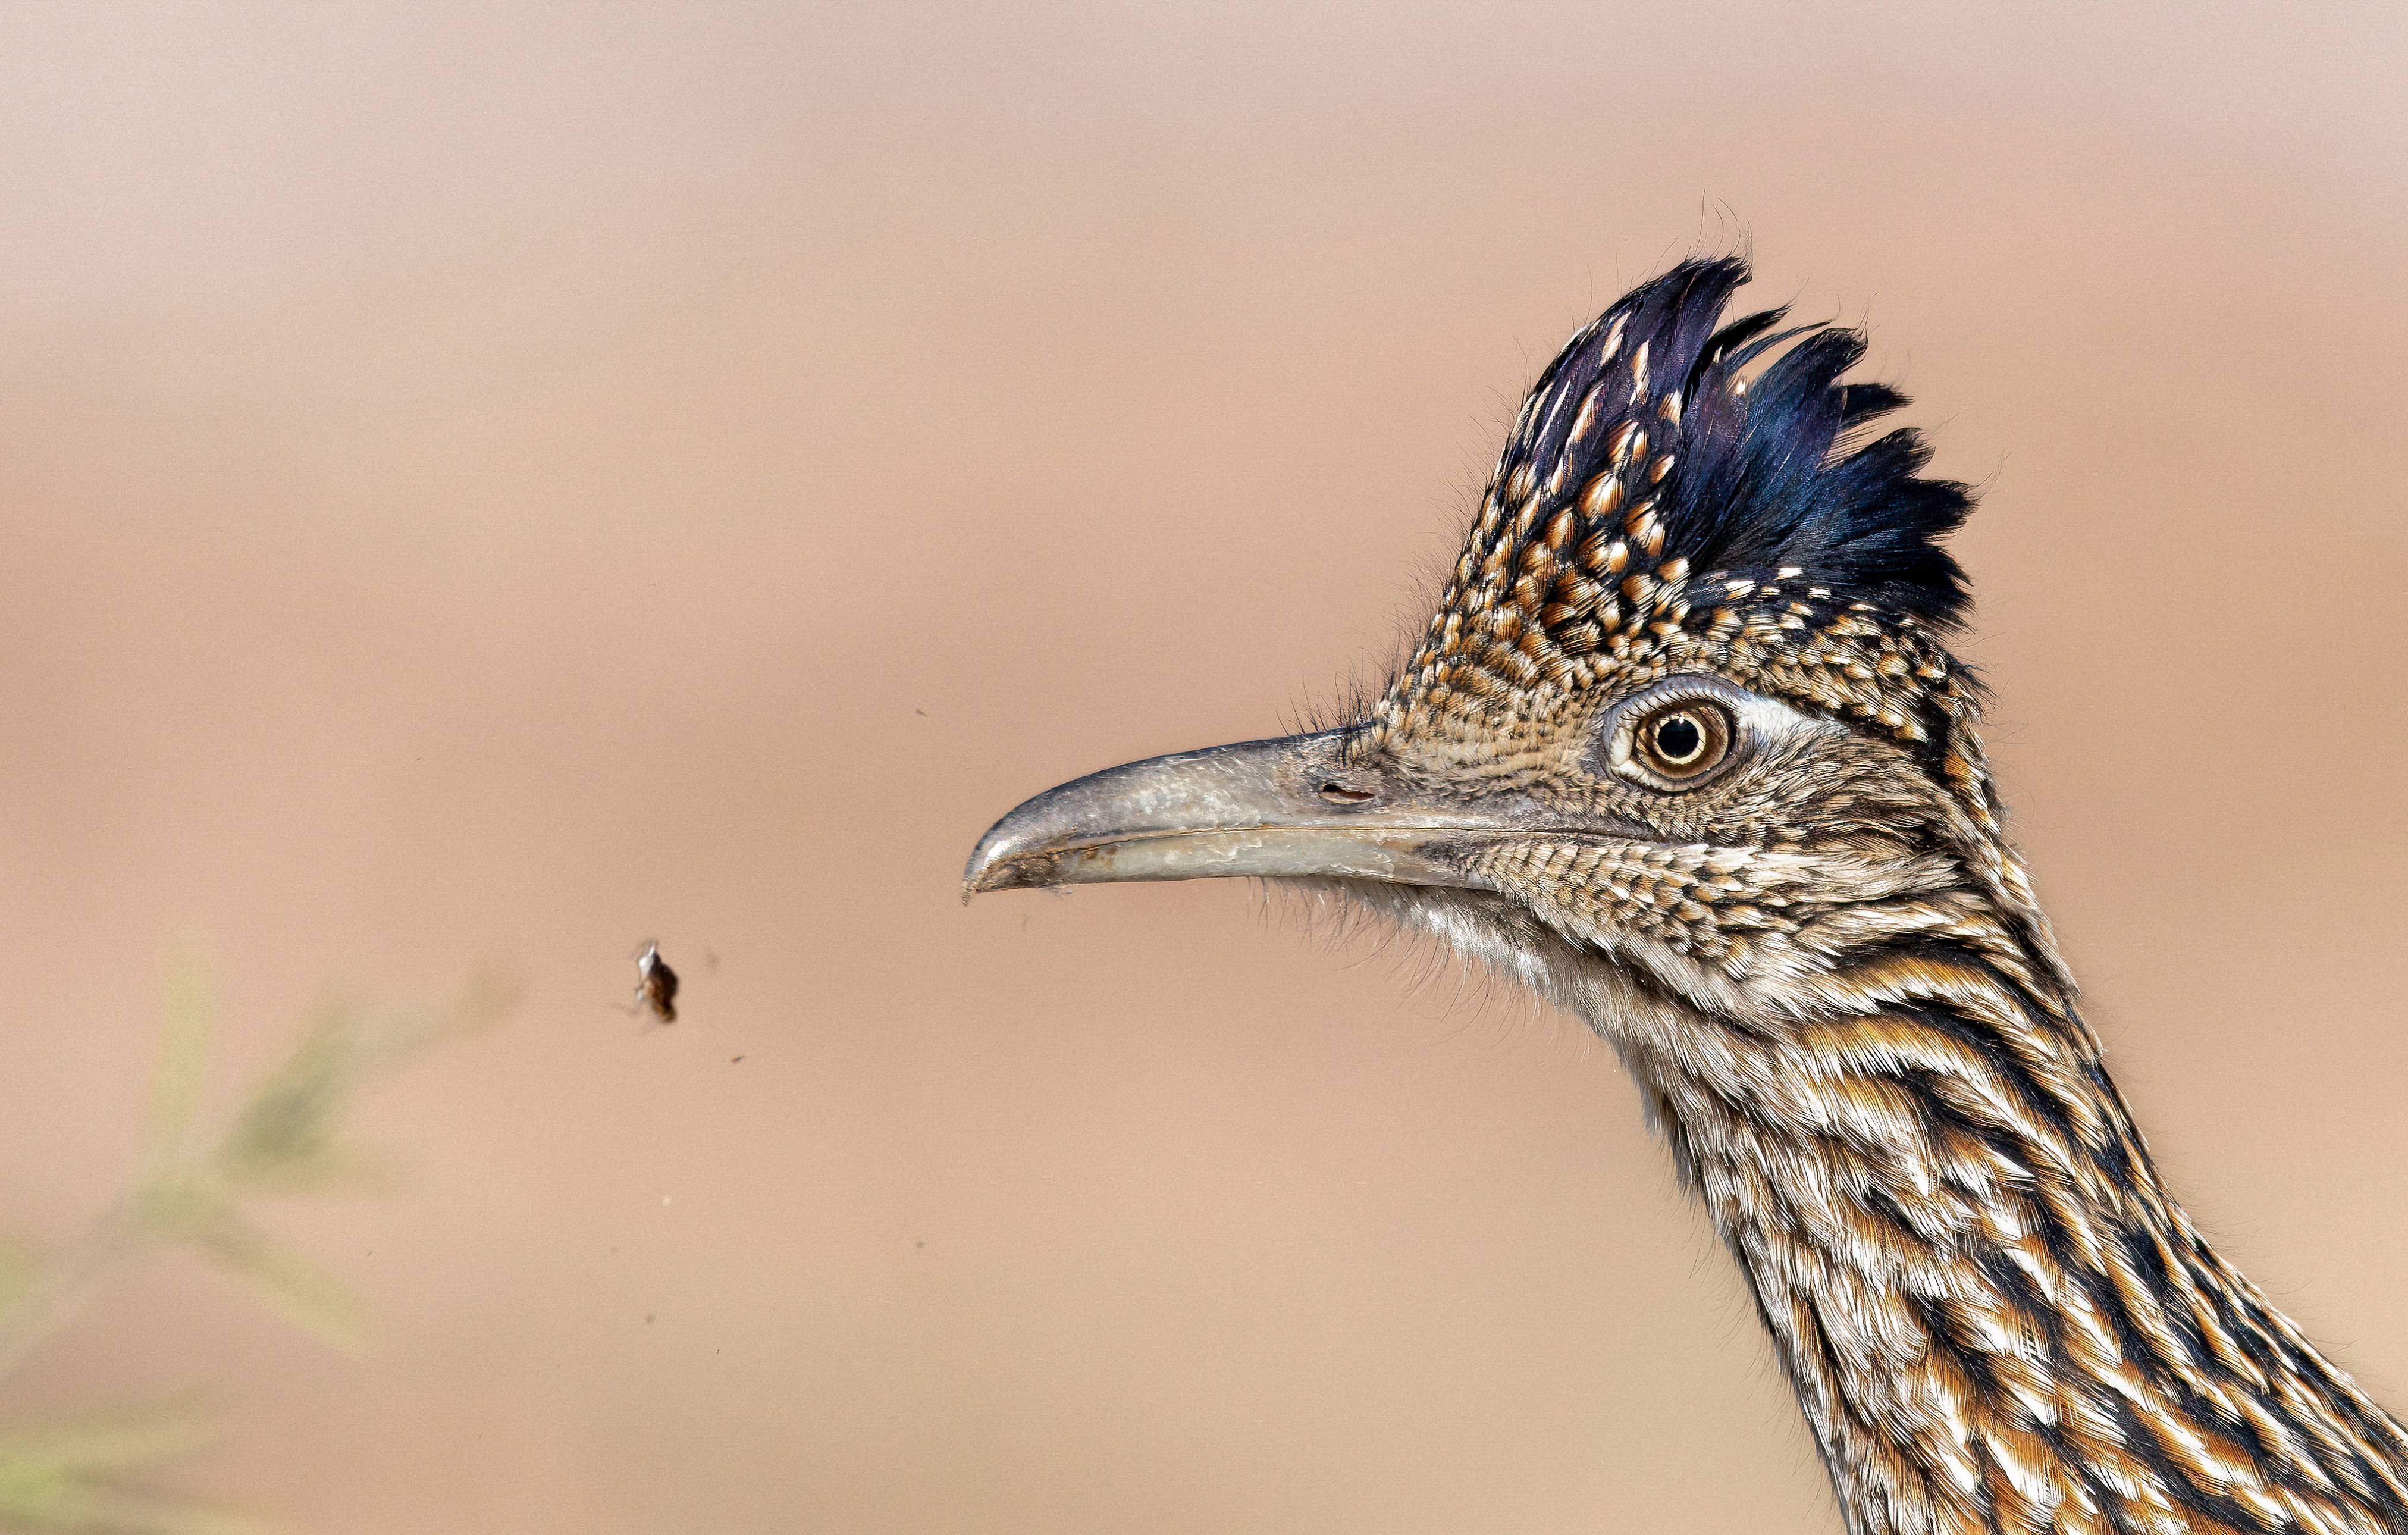 Photo by Aidan Yu  |  One of the most iconic birds of the desert, the Greater Roadrunner. Its shy and elusive nature means that photographing it is particularly challenging. On this occasion, the roadrunner sped past me, foraging, as I lay in the dirt, and I managed to capture the precise moment it dropped its lunch!